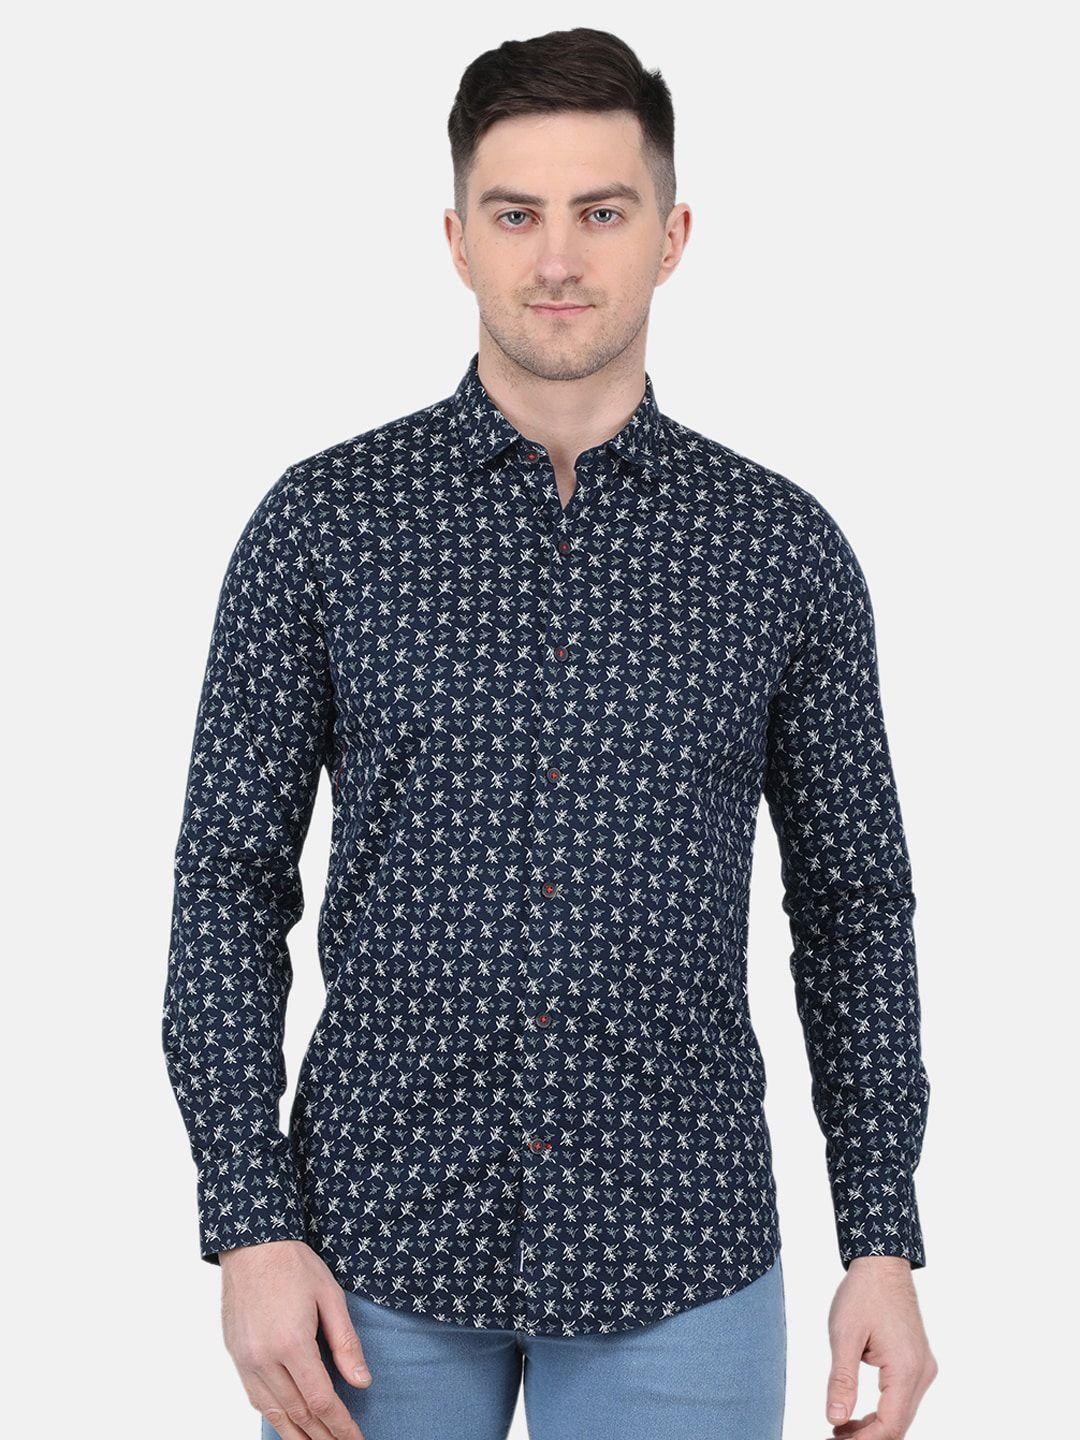 monte carlo straight floral printed cotton casual shirt